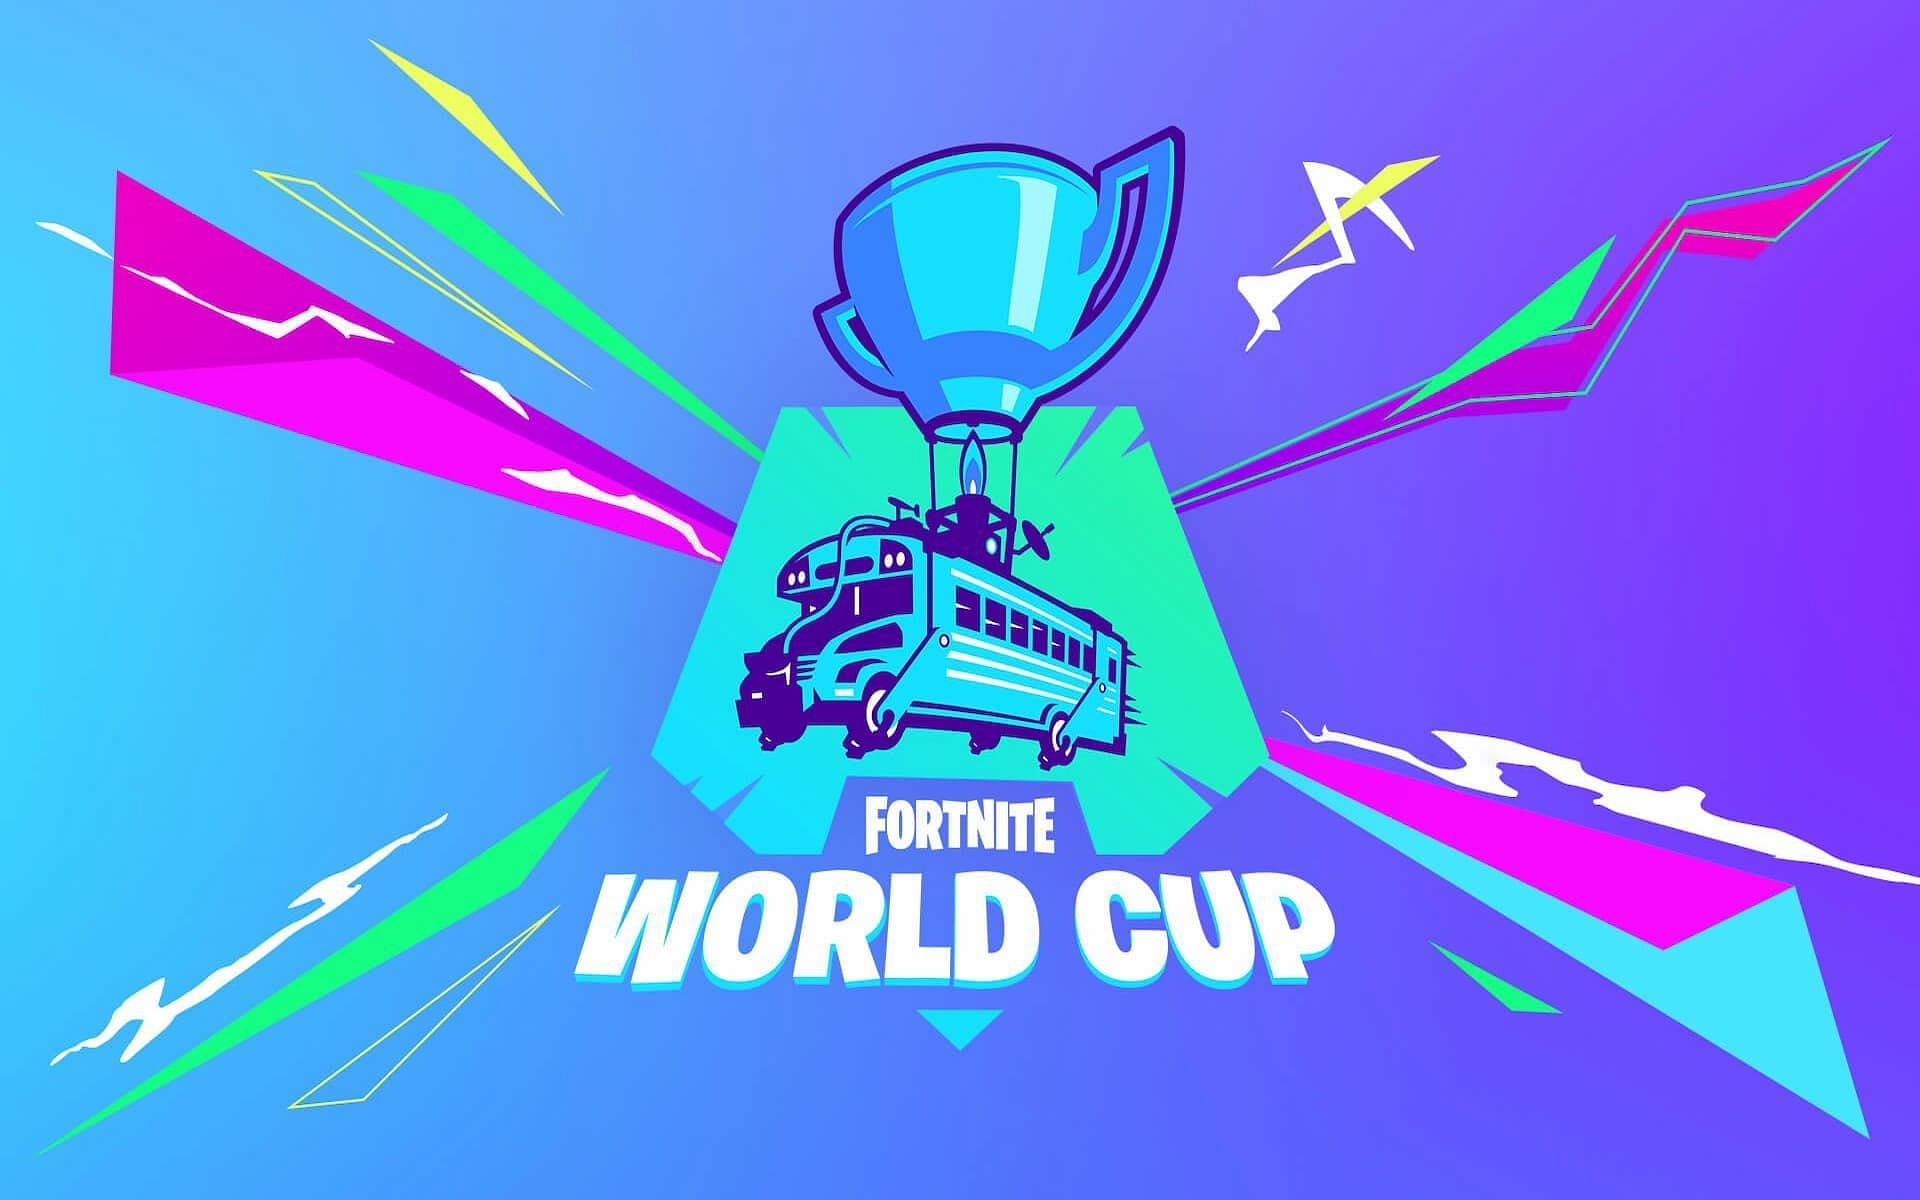 Fortnite World Cup 2022 (LAN) Start date and time, venue, and more